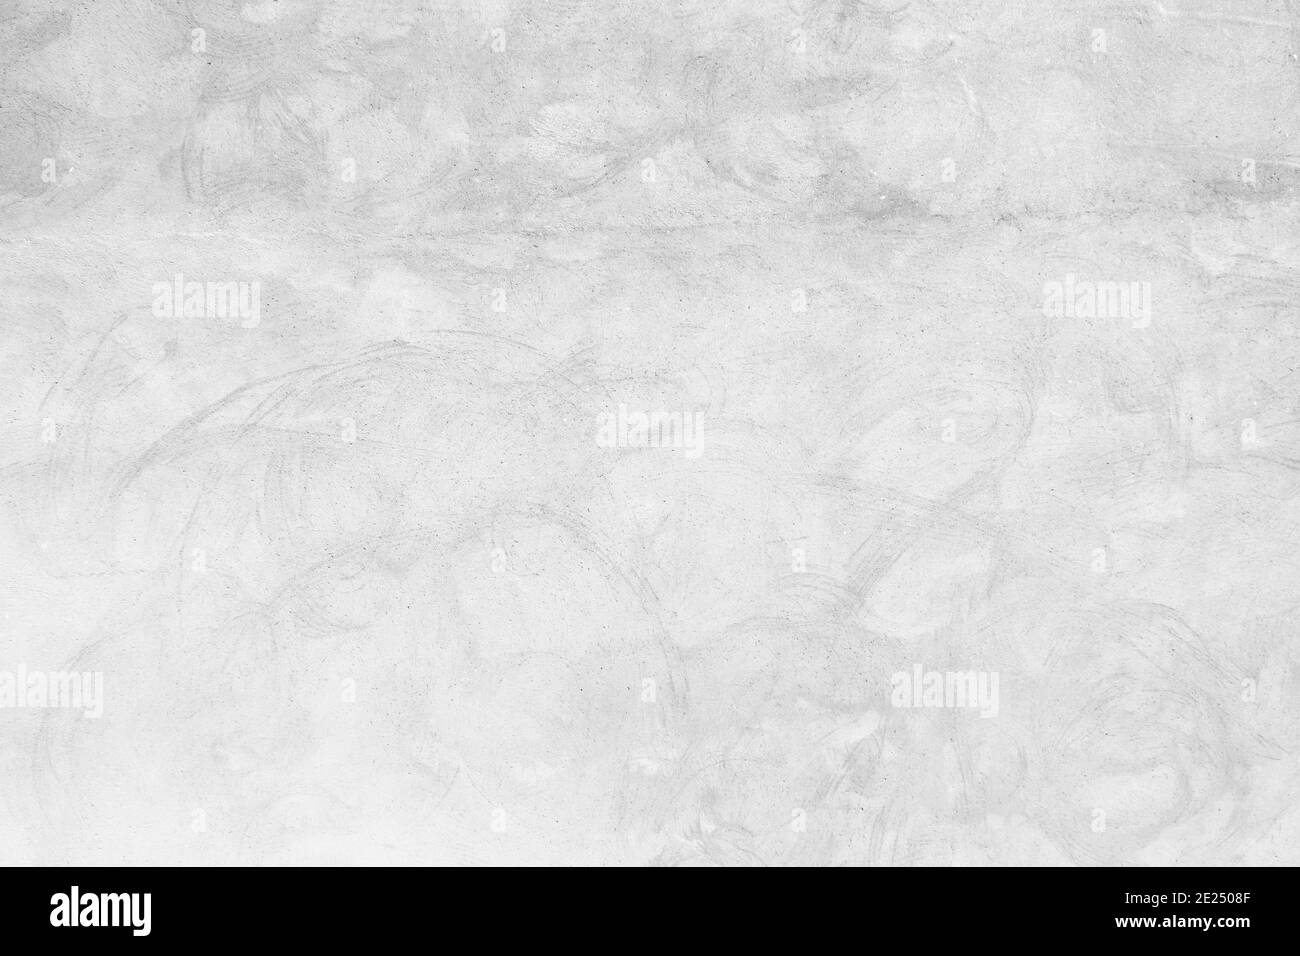 Light grey concrete wall background or texture Stock Photo